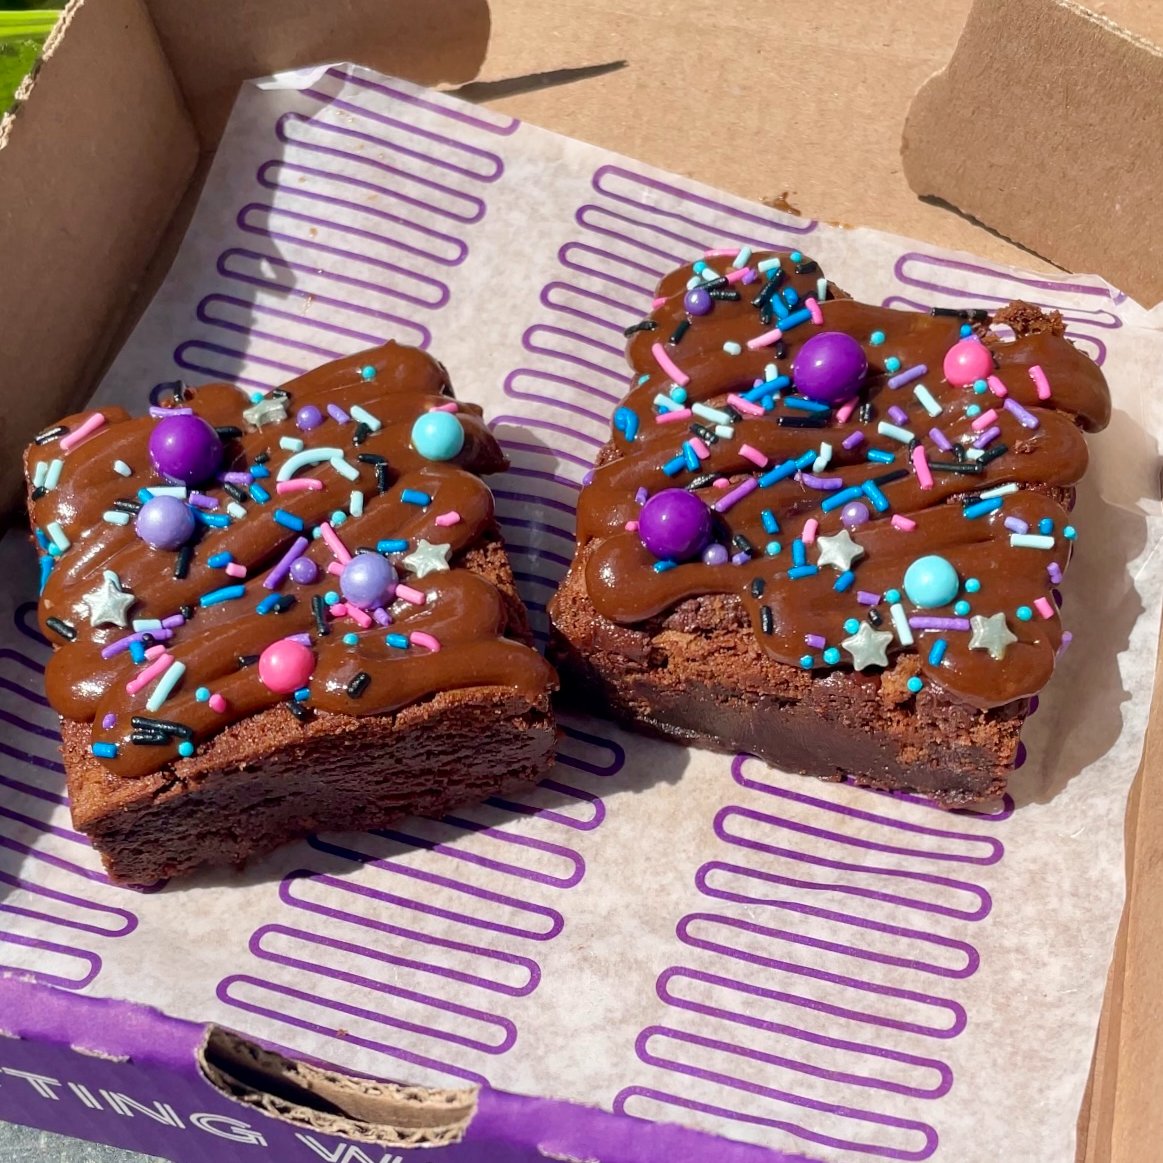 our Chocolate Chip Brownie is coming for its main character moment Loaded Brownies are $4 all weekend when you order in the Insomnia Cookies App. download the App here ➡️ qrco.de/bcrIbT